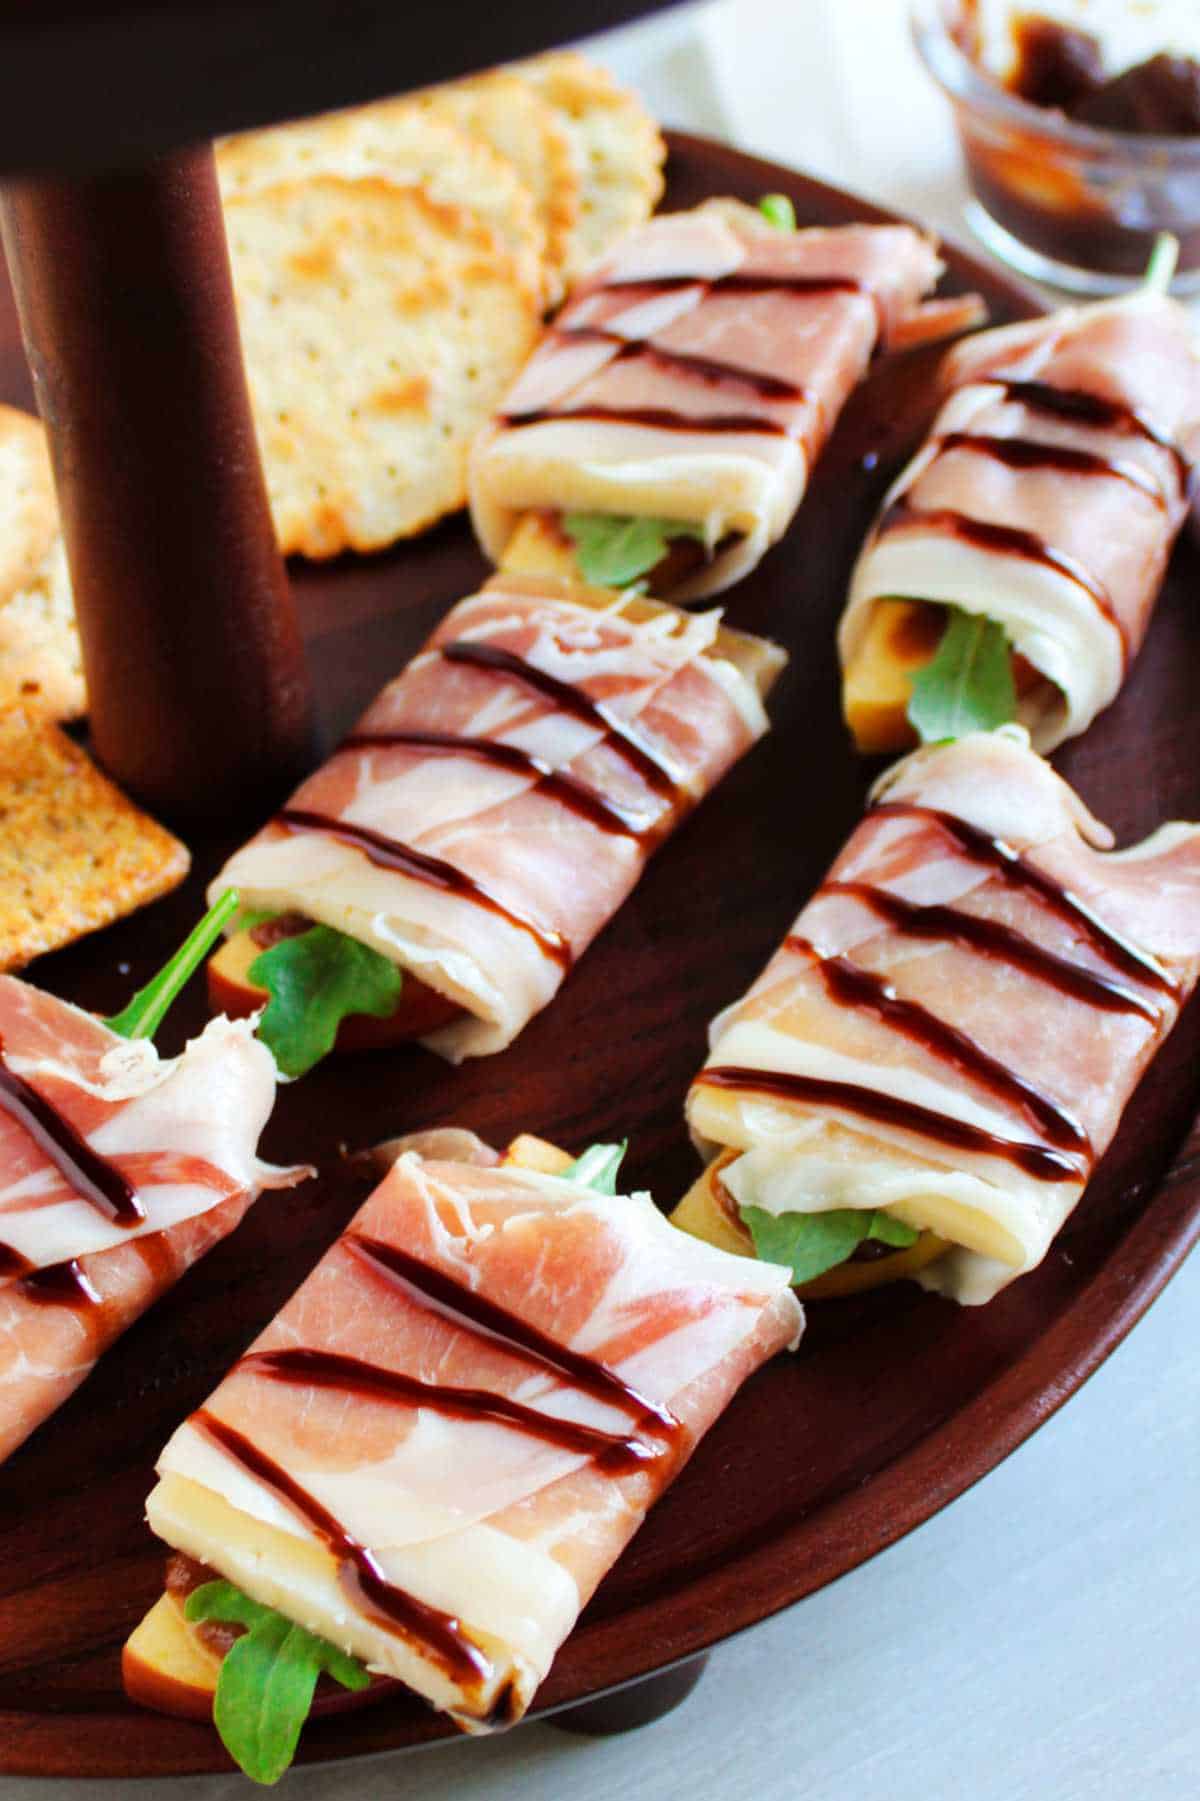 prosciutto wrapped bundles of apple and cheese drizzled with balsamic glaze.